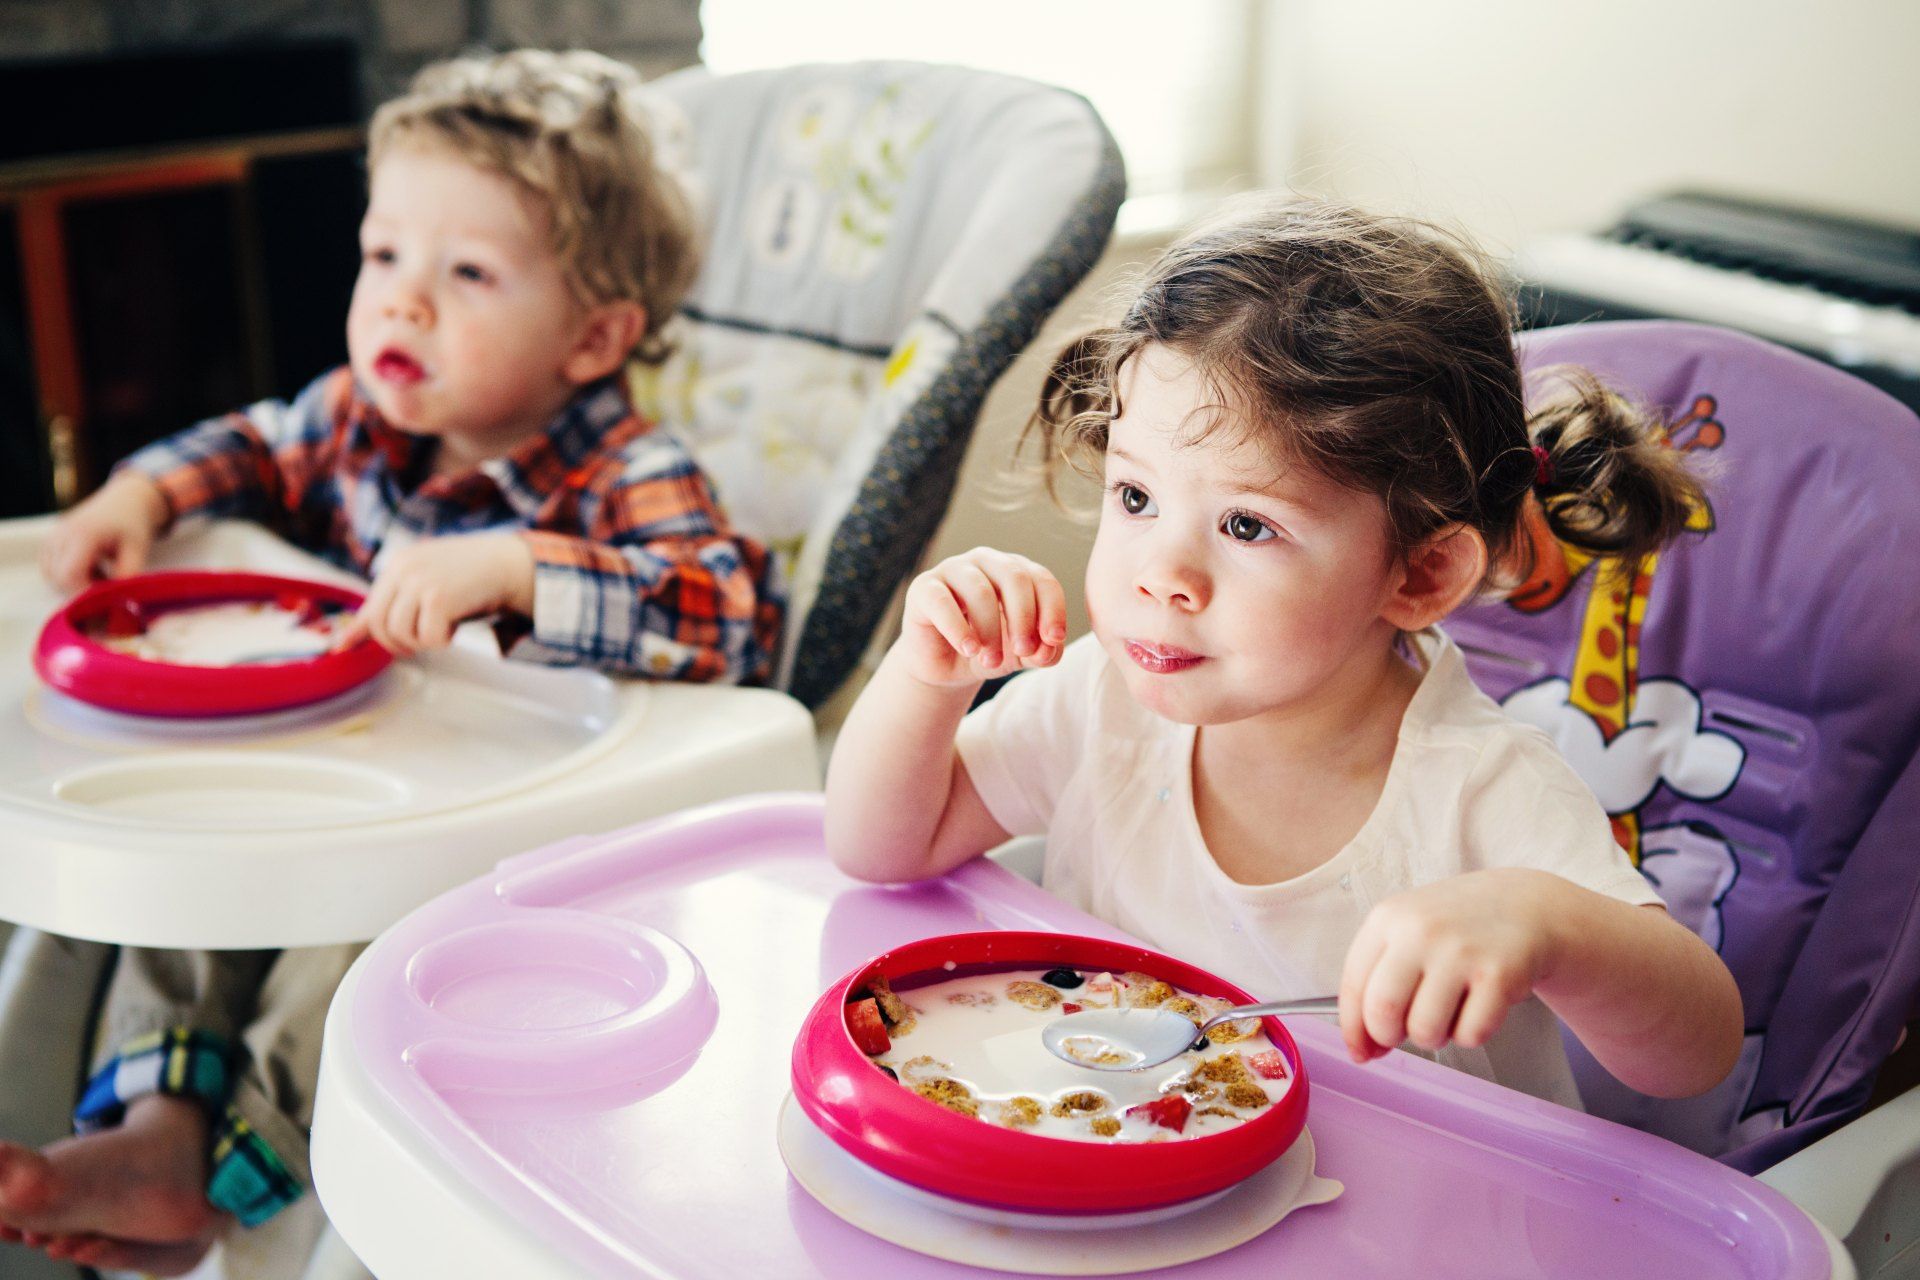 A young boy and girl sit in high chairs while eating cereal - cuggl high chair recall